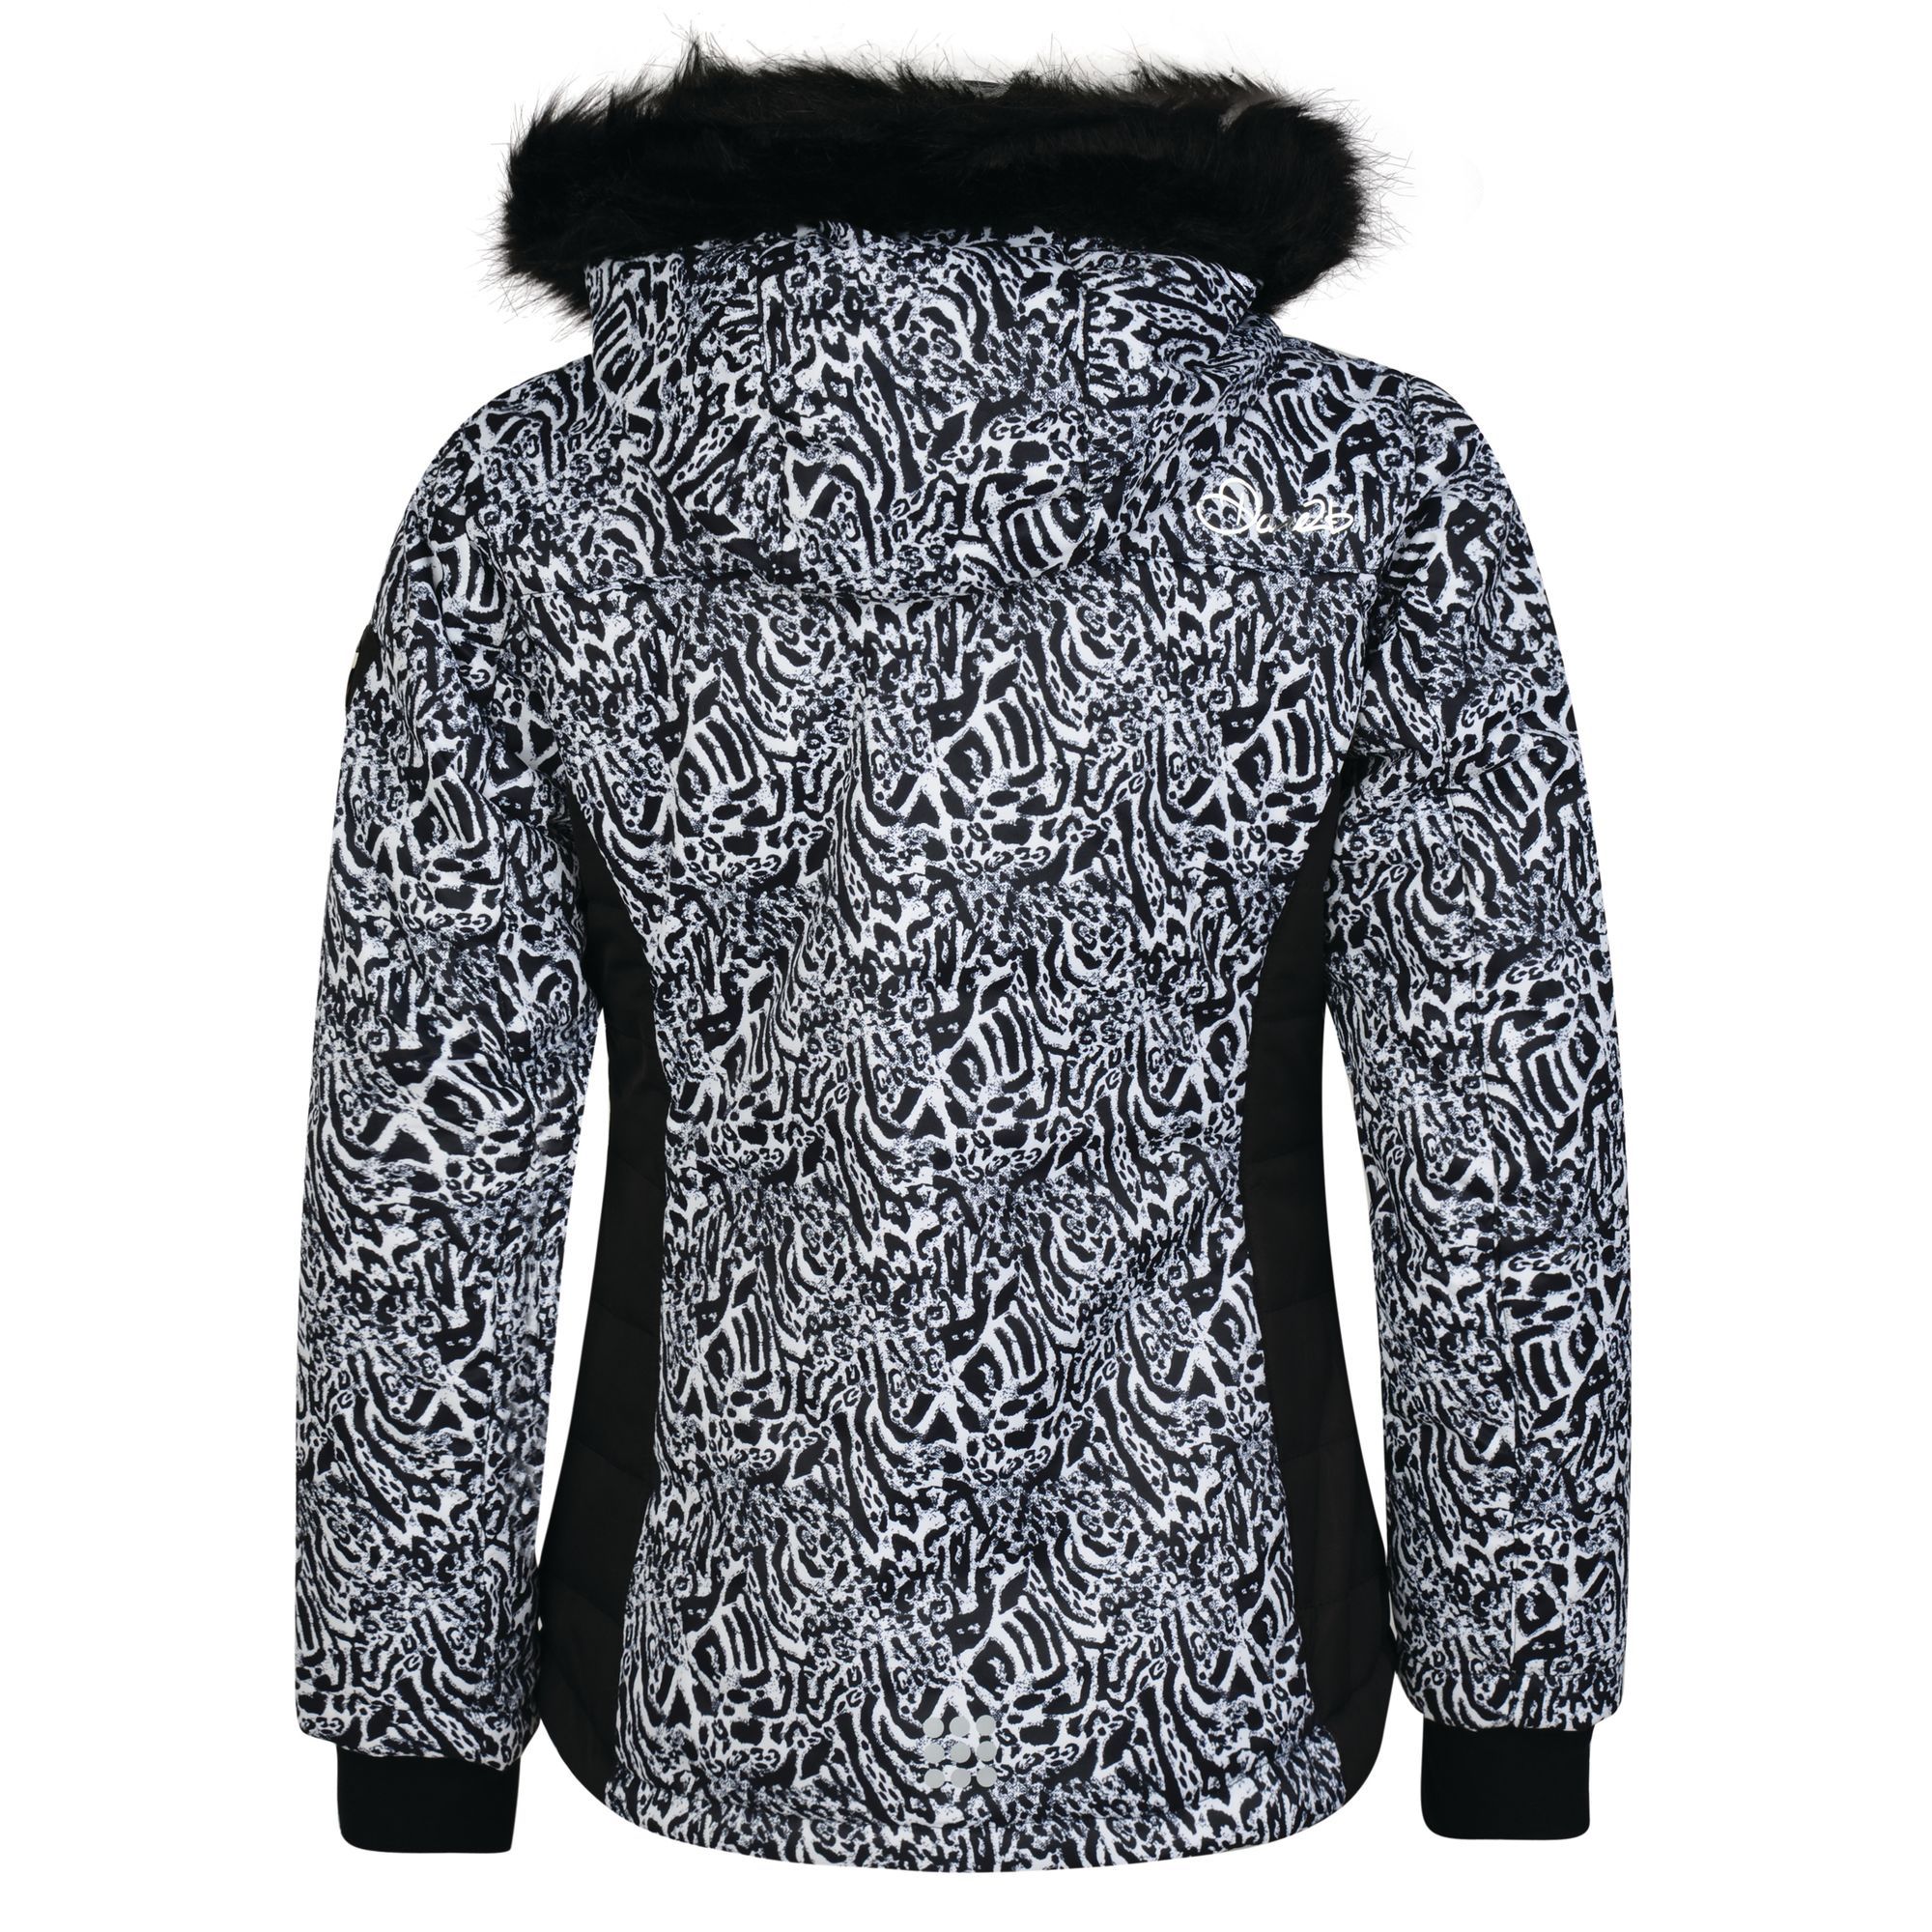 100% Polyester. Luxe girls ski jacket. Made from waterproof/breathable polyester fabric with four-way stretch for aerobic mobility. High warmth, low-bulk bulk insulation. Fine quality faux-fur trimmed hood. Powder blocking snowskirt. Cosy inner stretch cuffs. Zipped pockets, including a mesh google stash.